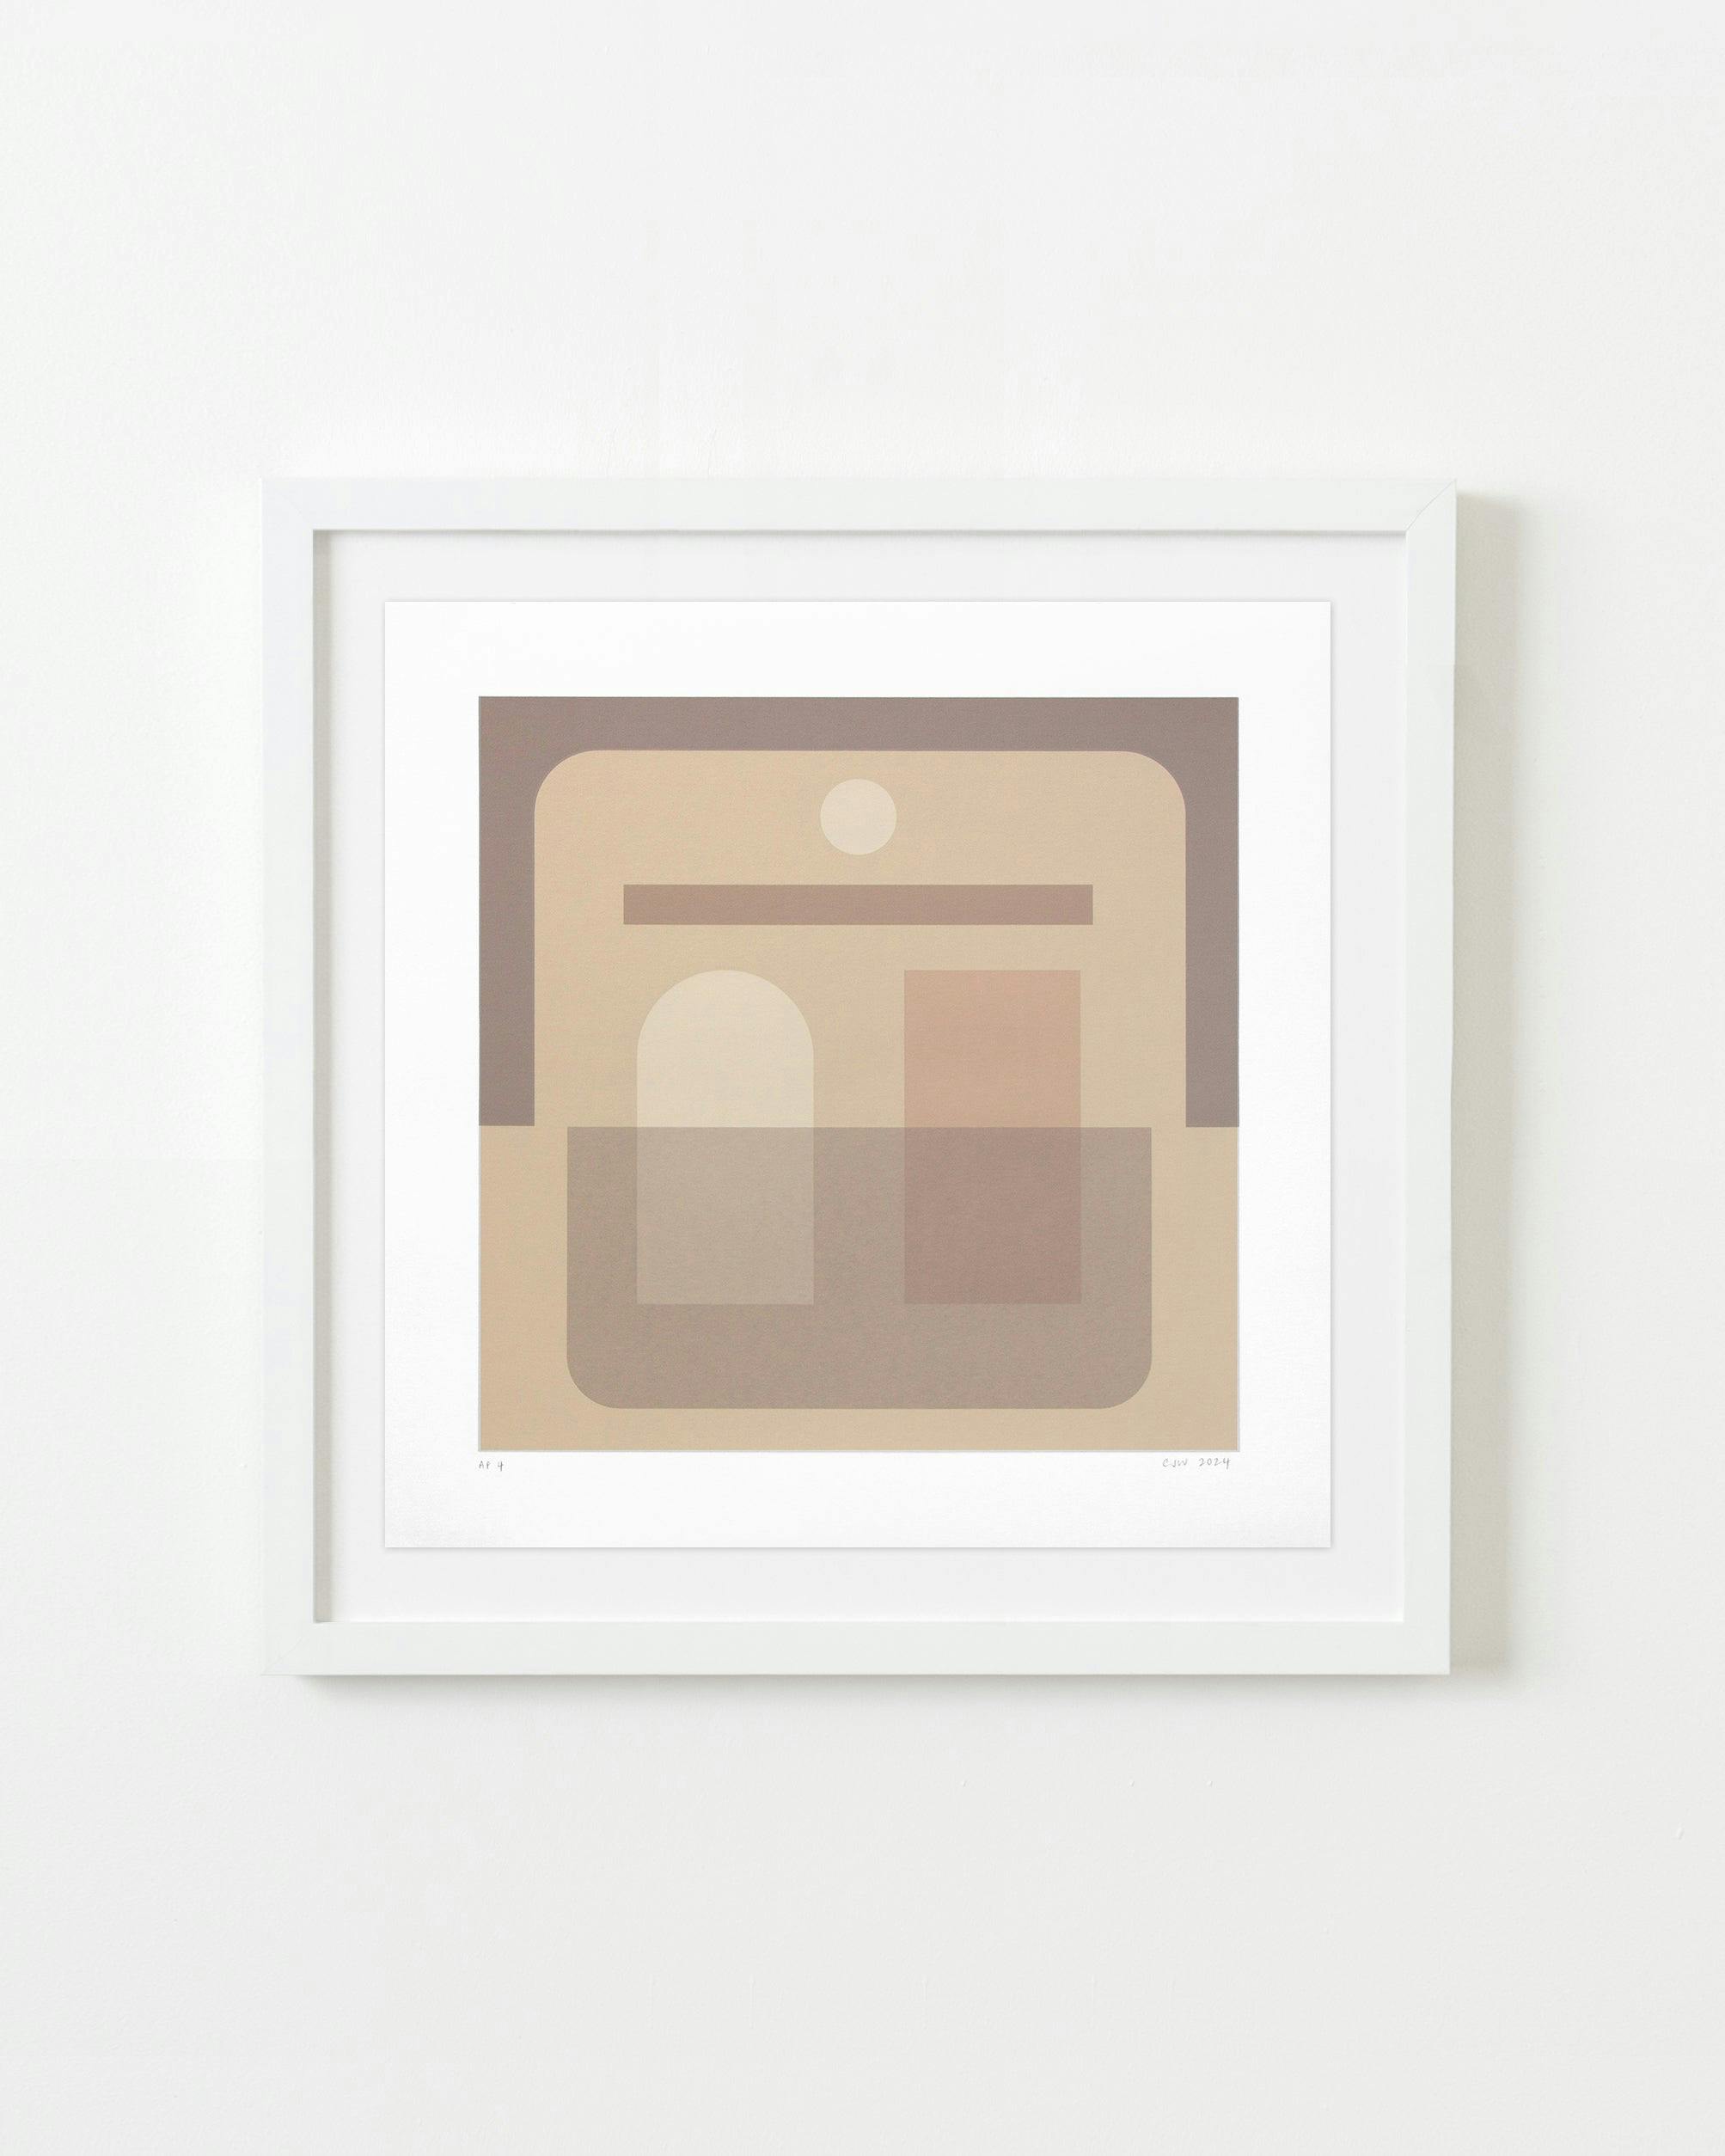 Print by Carla Weeks titled "Vocab Color Study in Neutral".